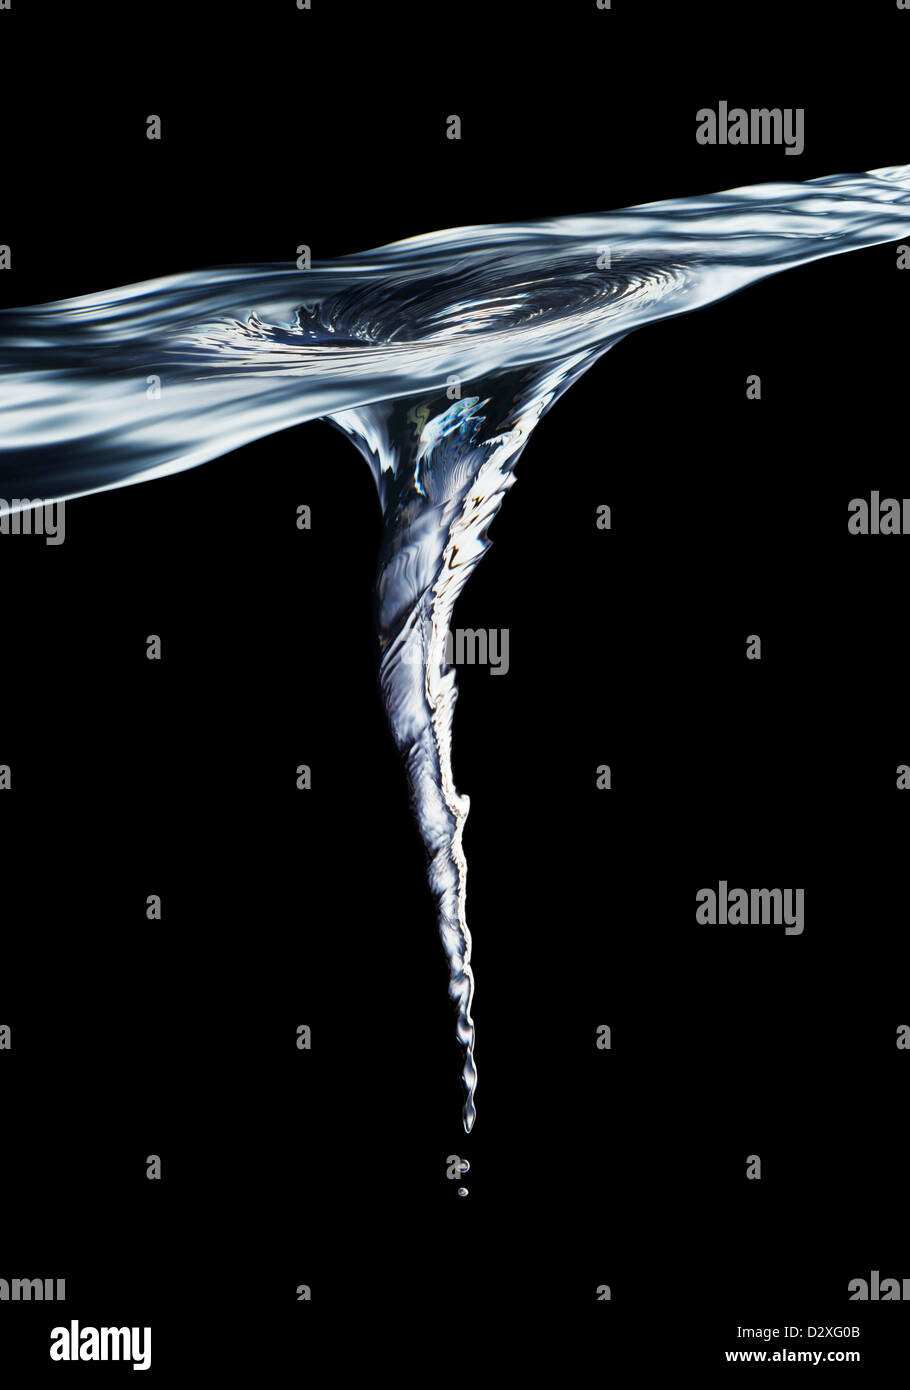 Vortex forming in water Stock Photo